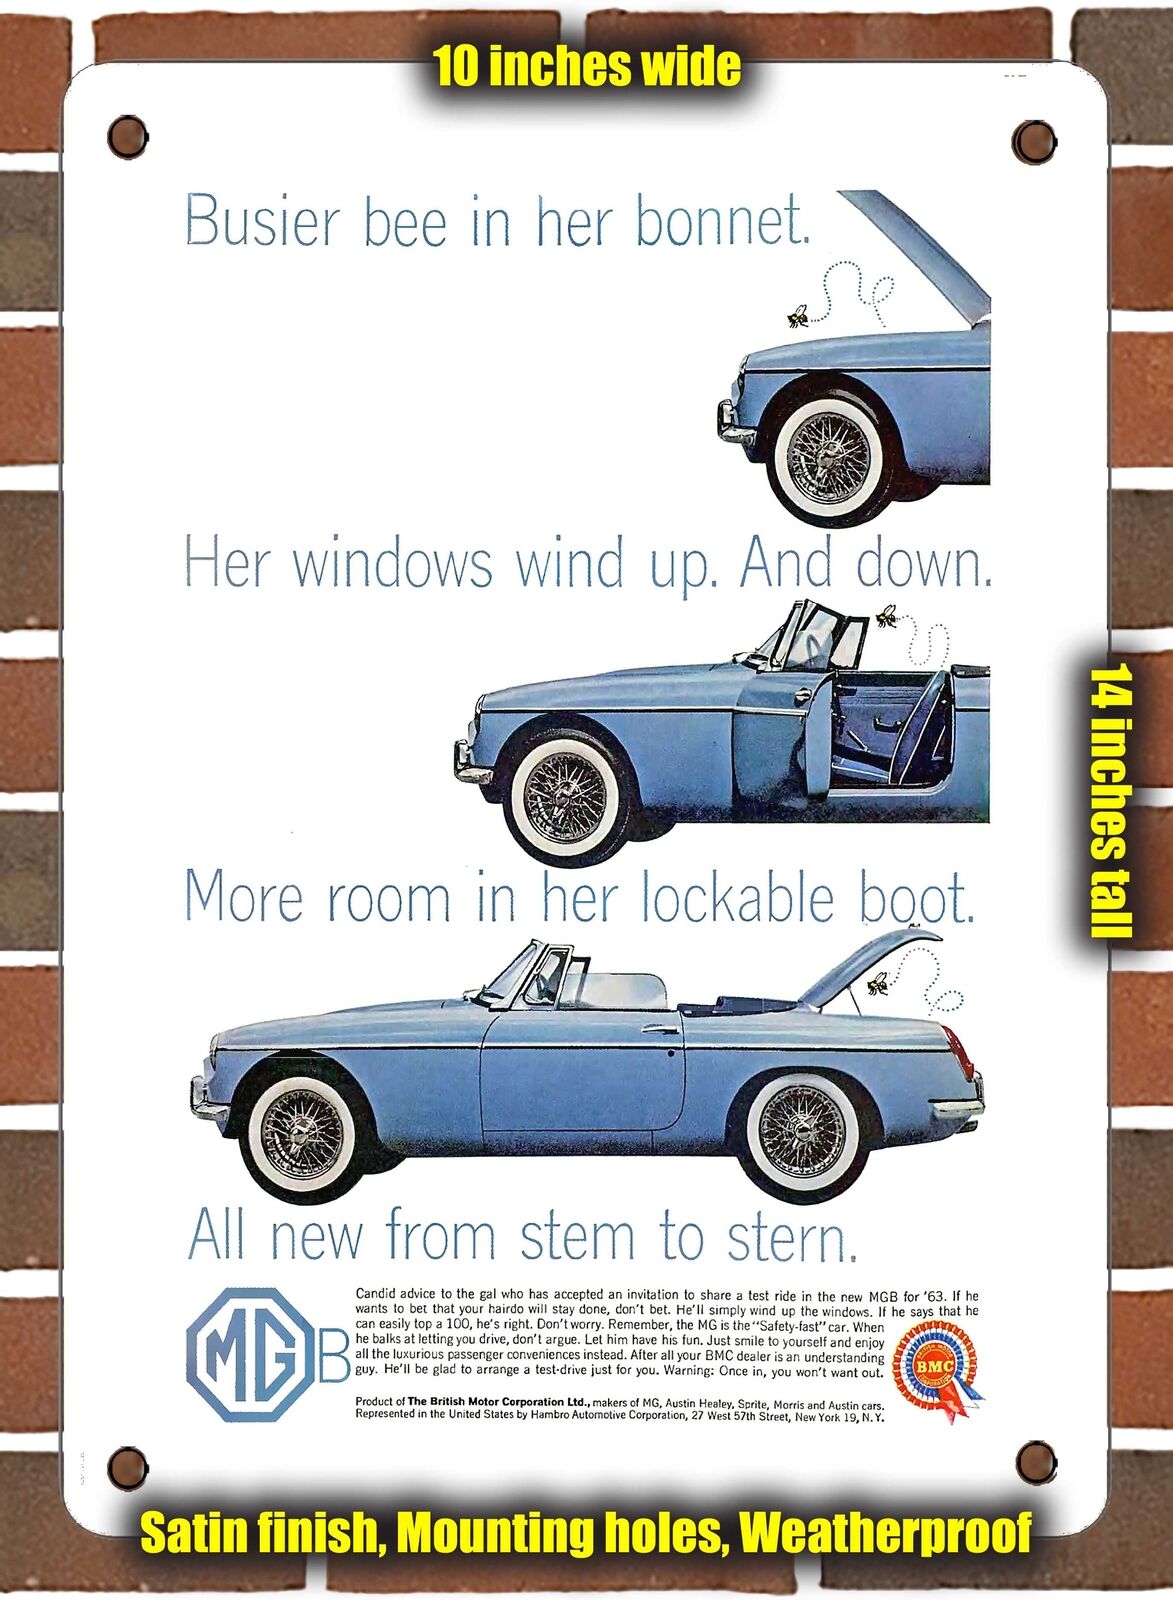 METAL SIGN - 1963 MG MGB Busier Bee in Her Bonnet. - 10x14 Inches